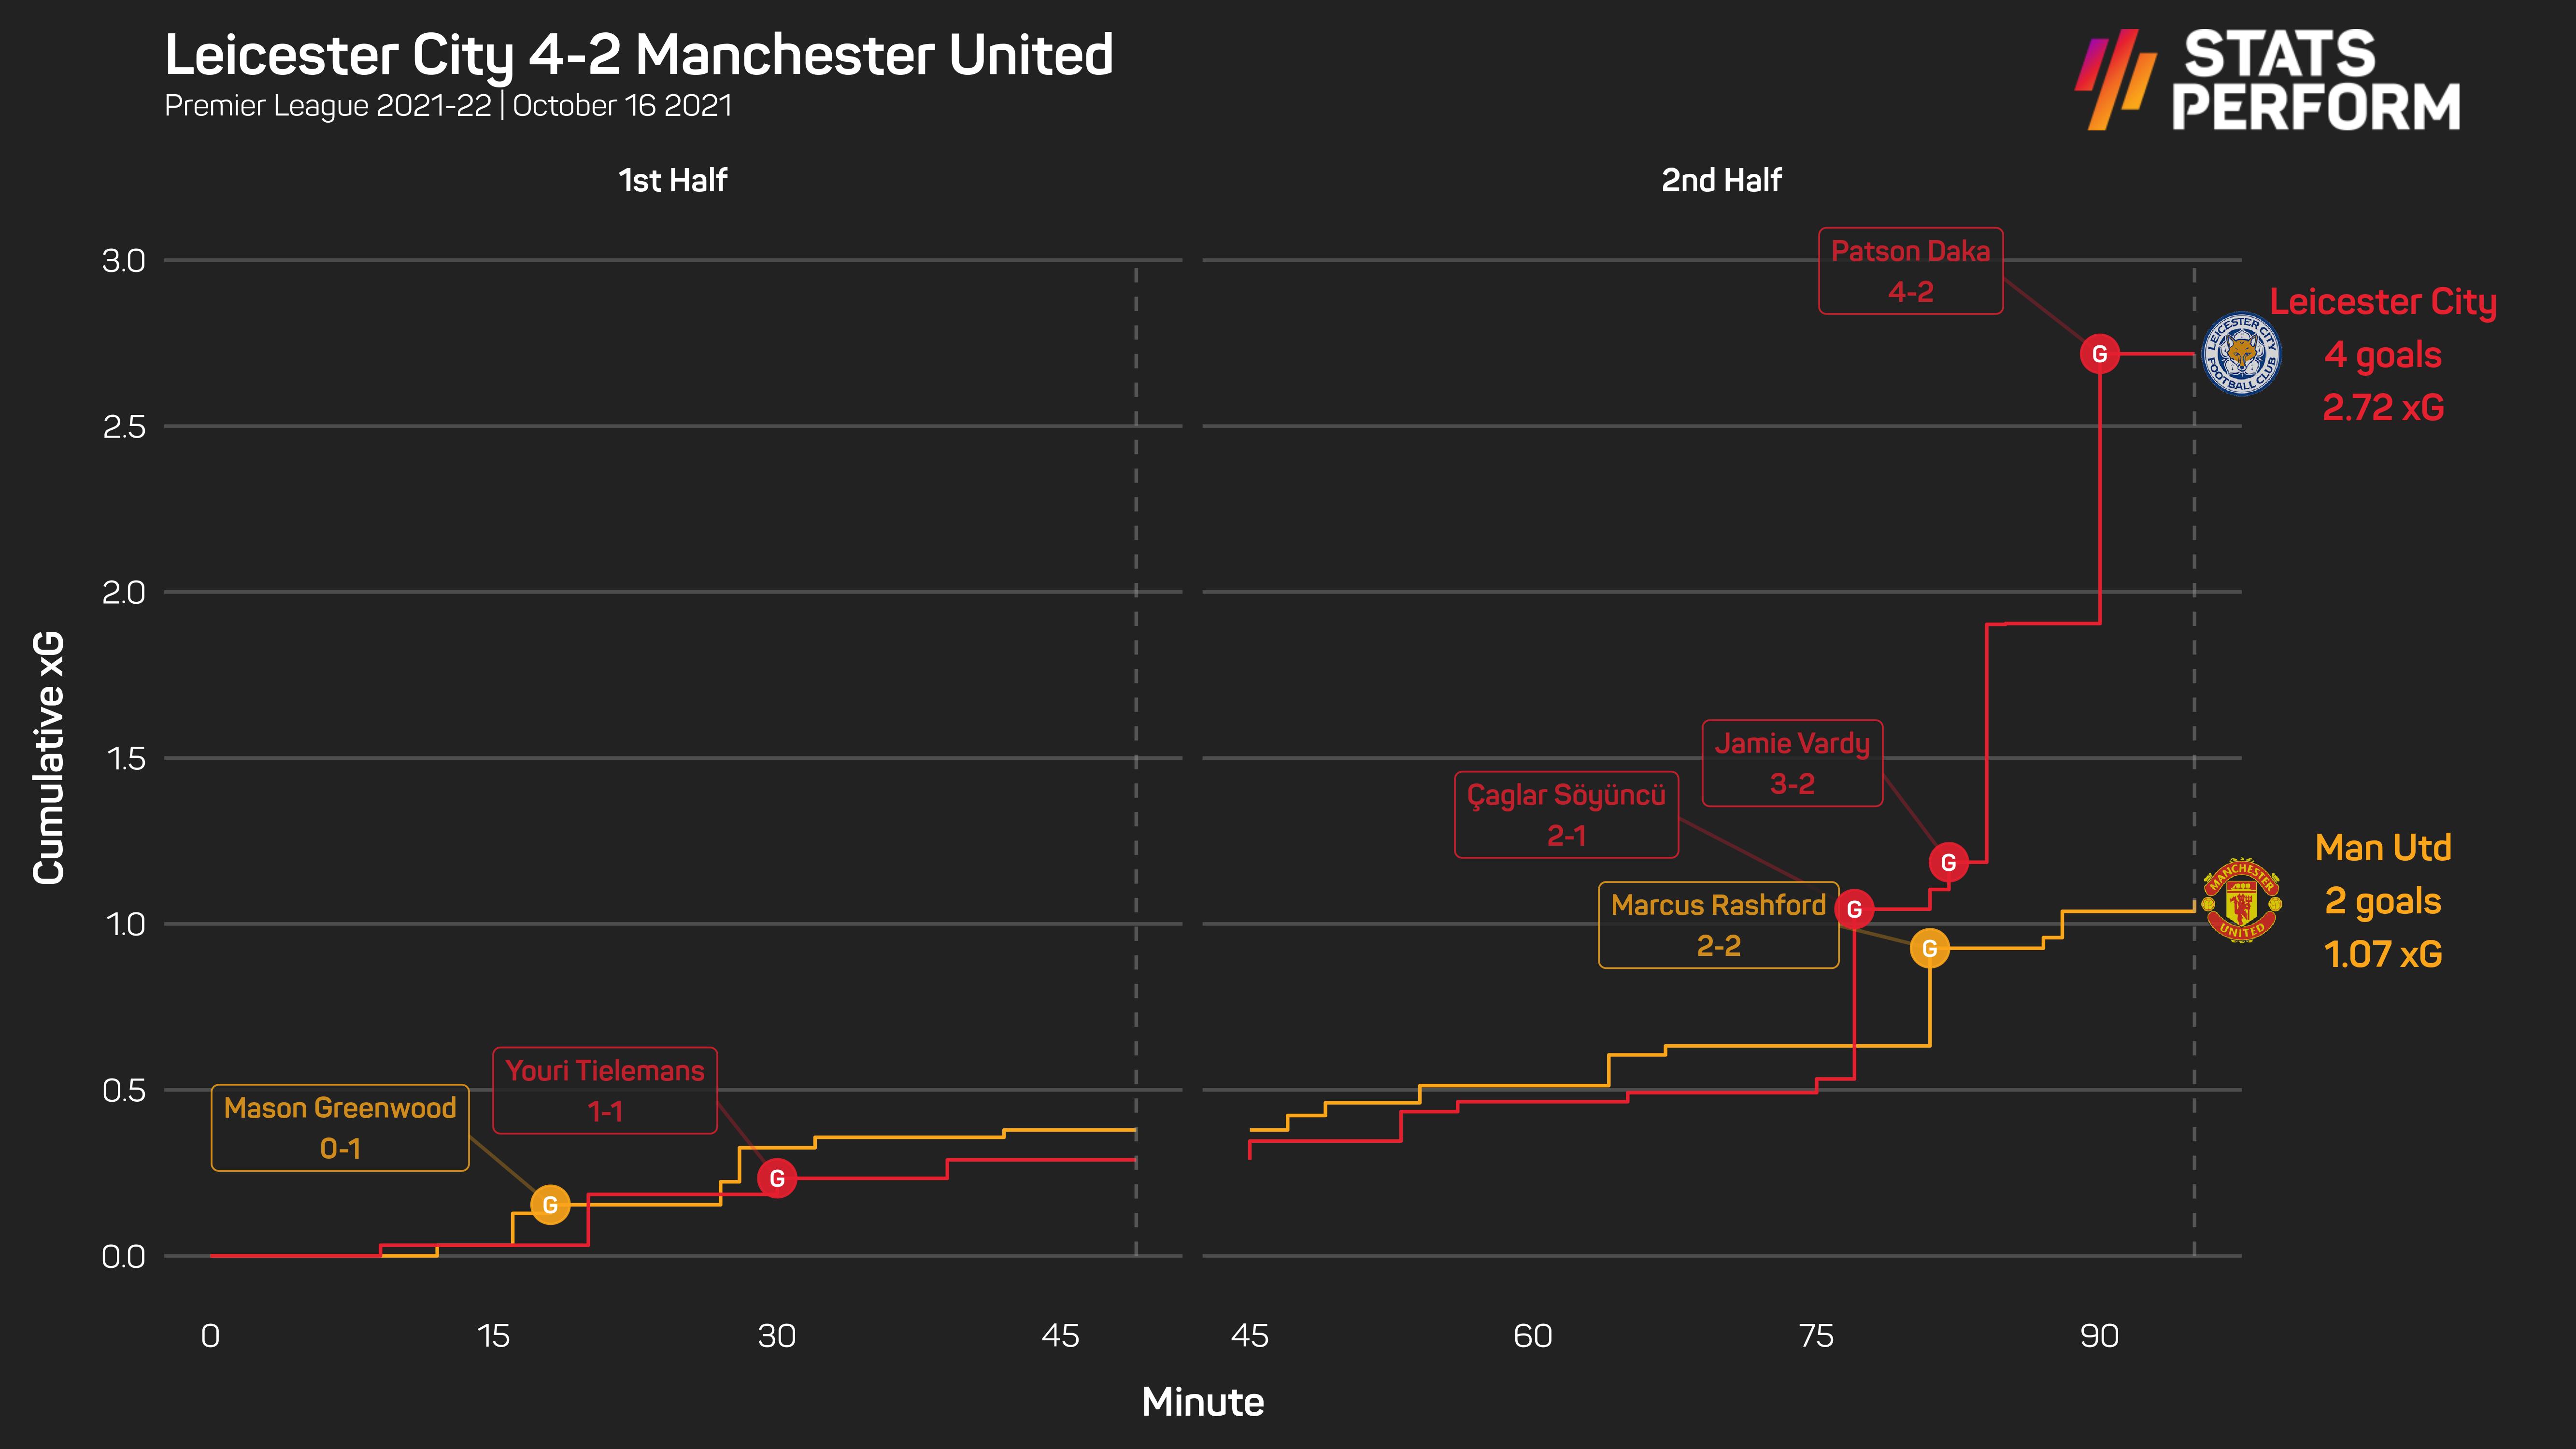 Leicester City 4-2 Manchester United xG race